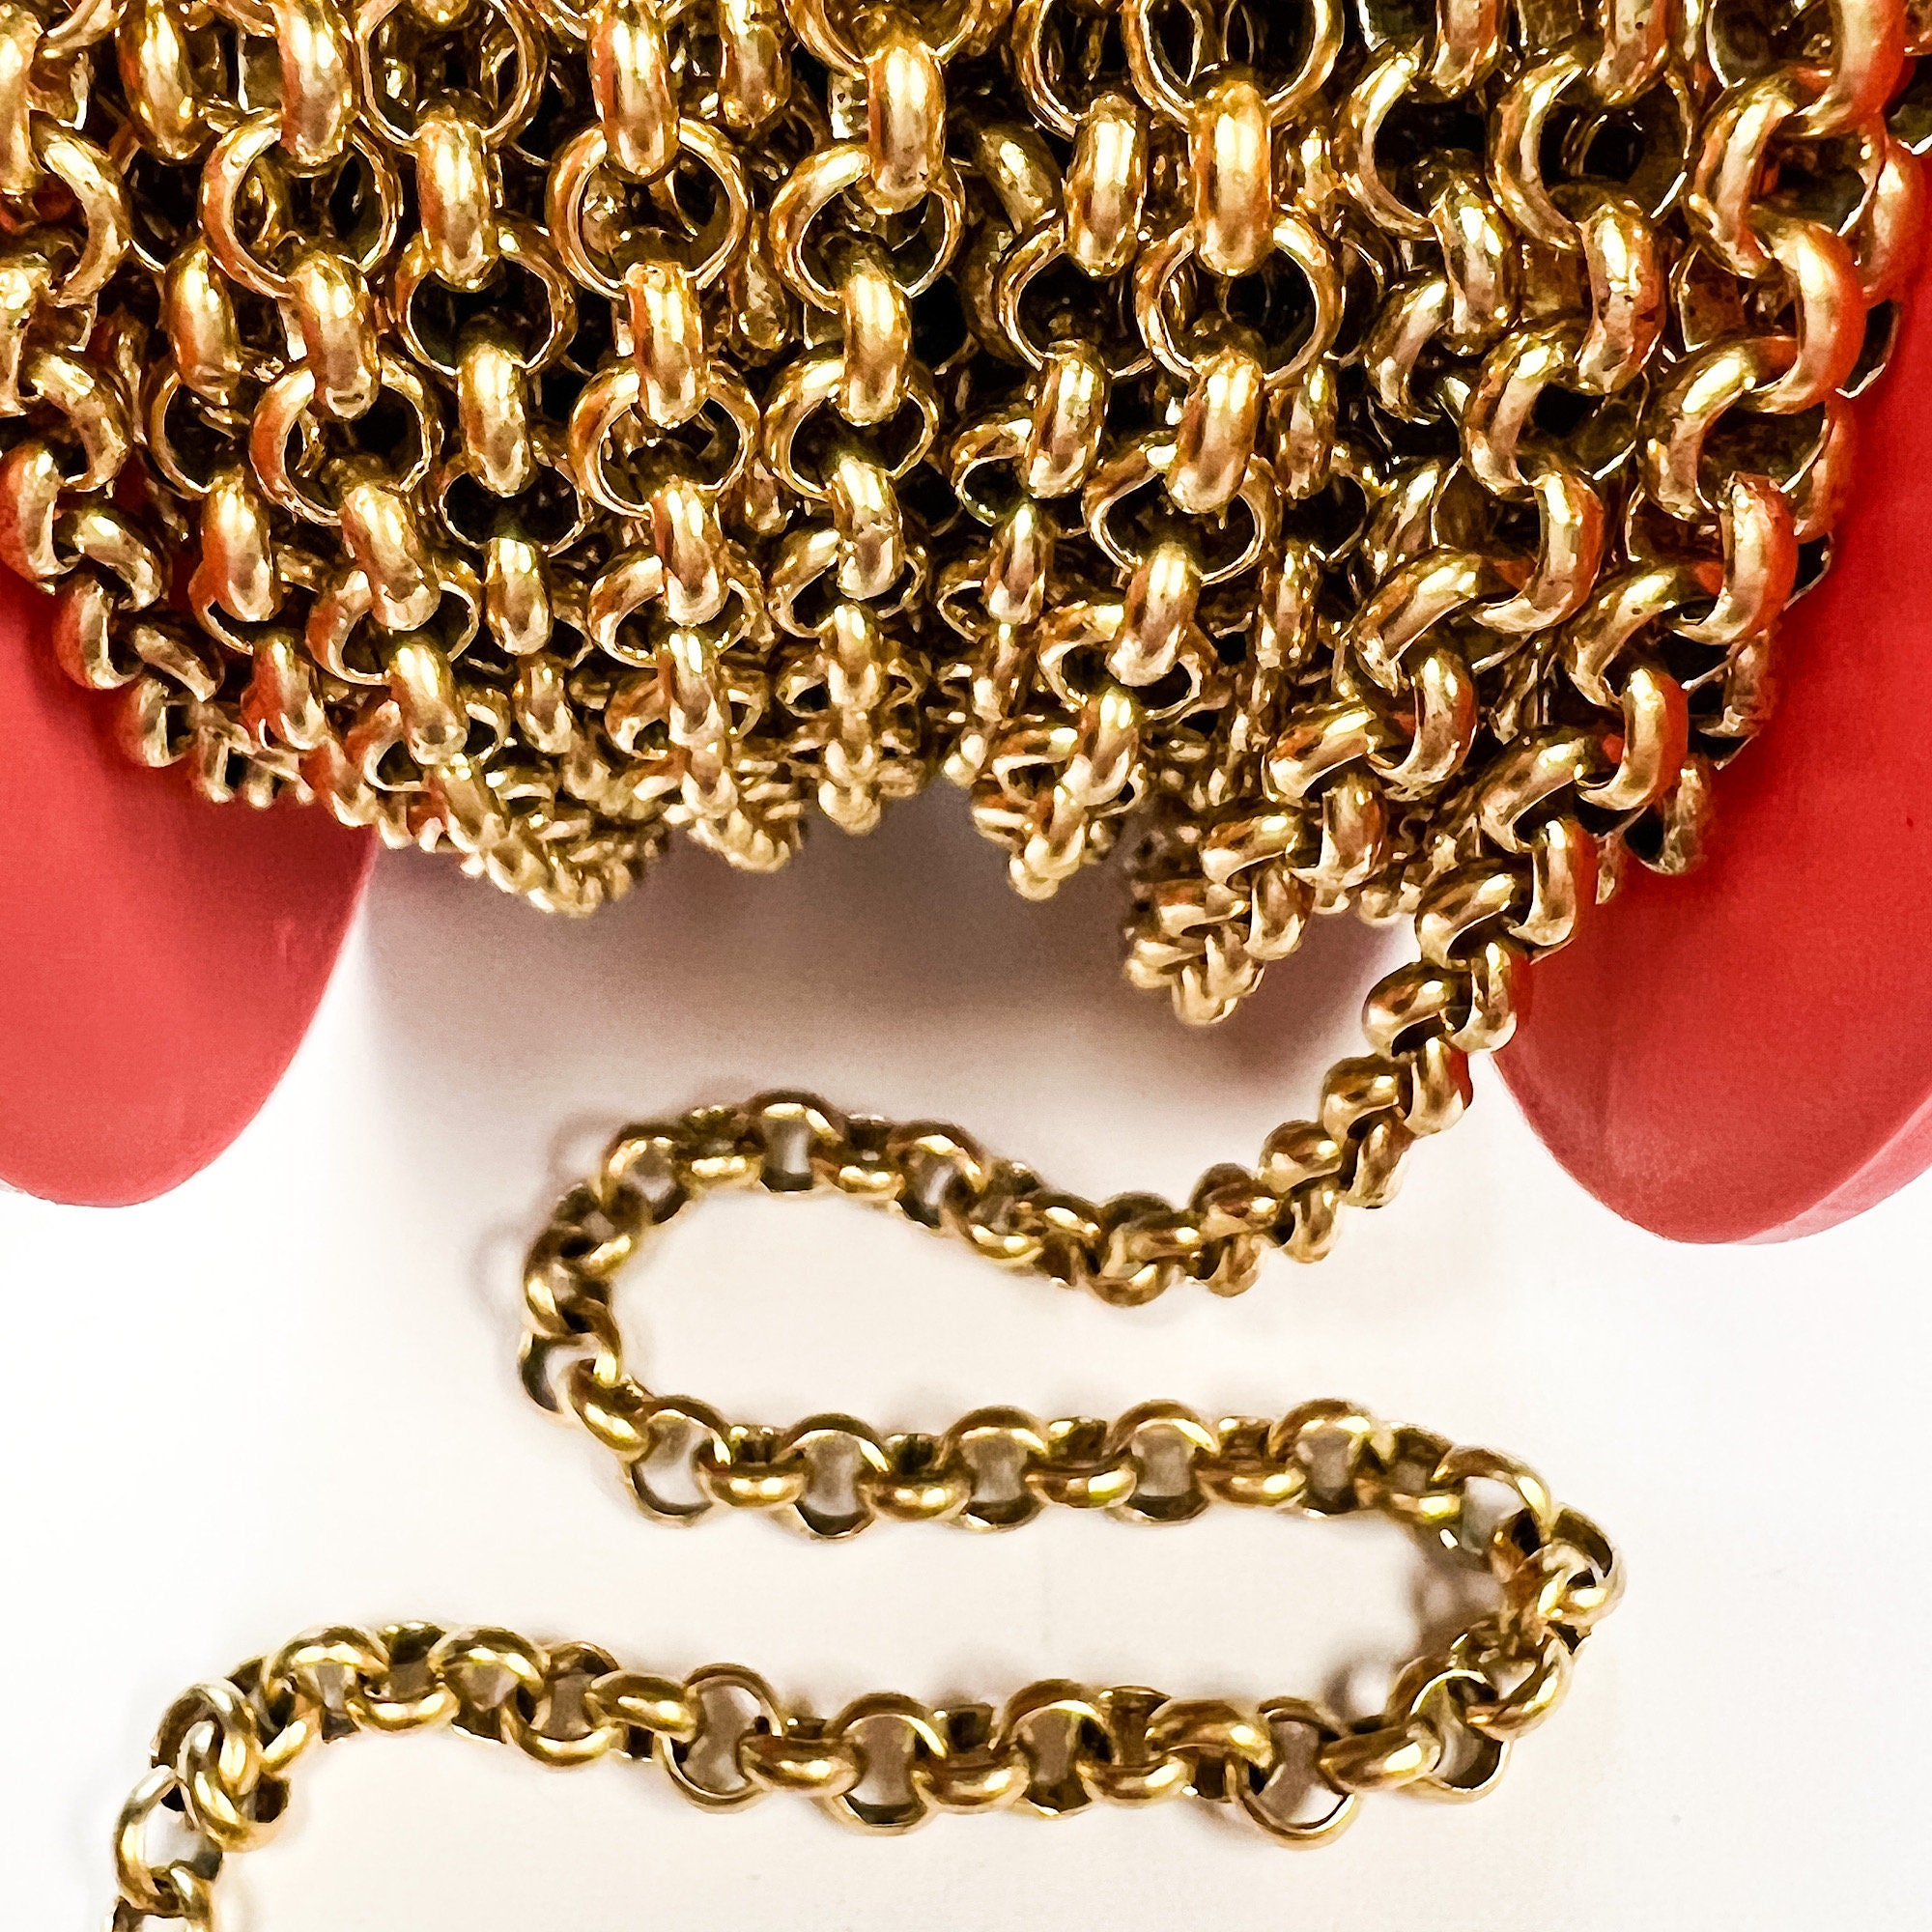 Chanel Chunky Rolo Chain Necklace in Burnt Orange